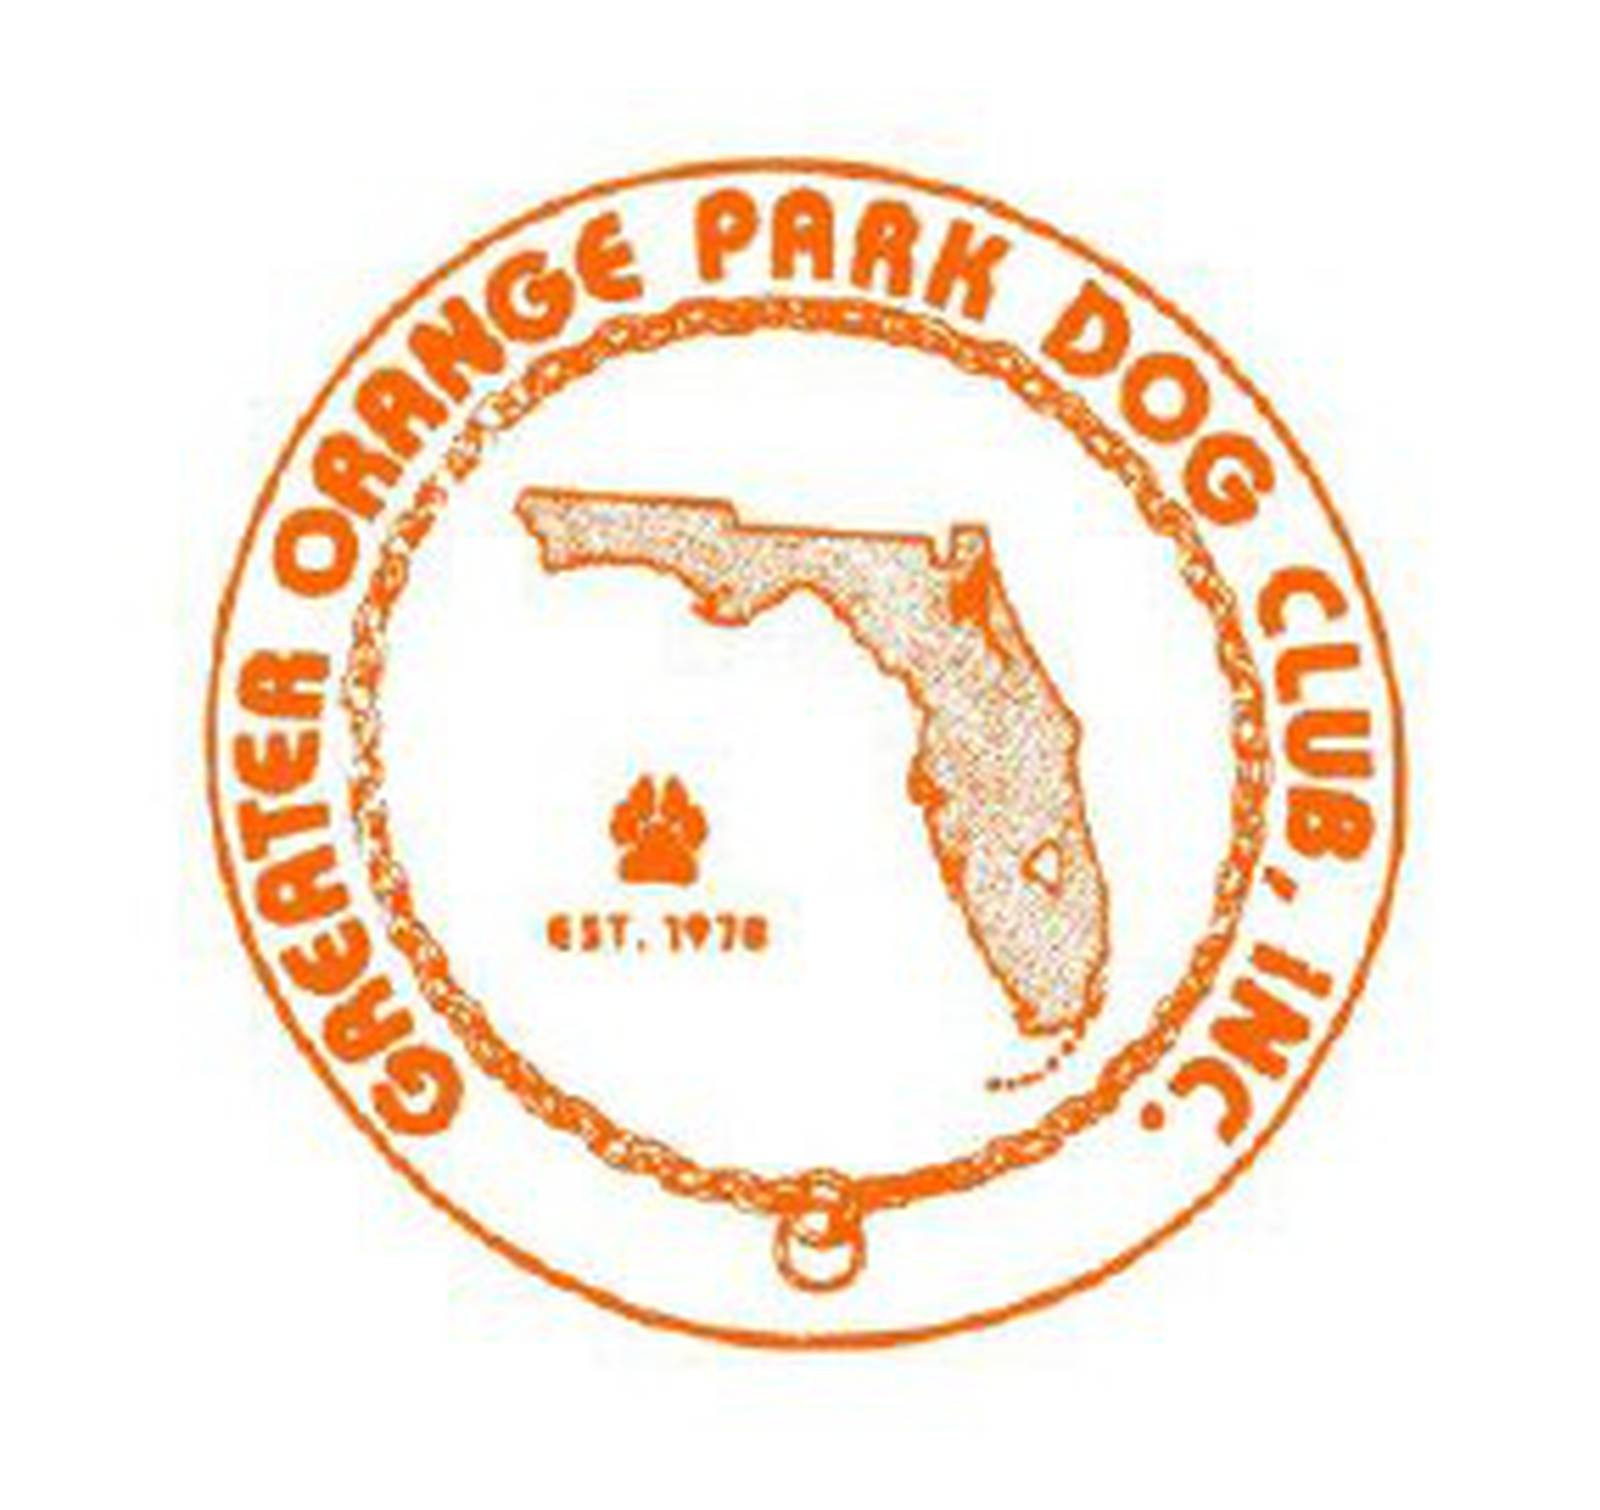 The Greater Orange Park Dog Club set to host annual all-breed dog shows